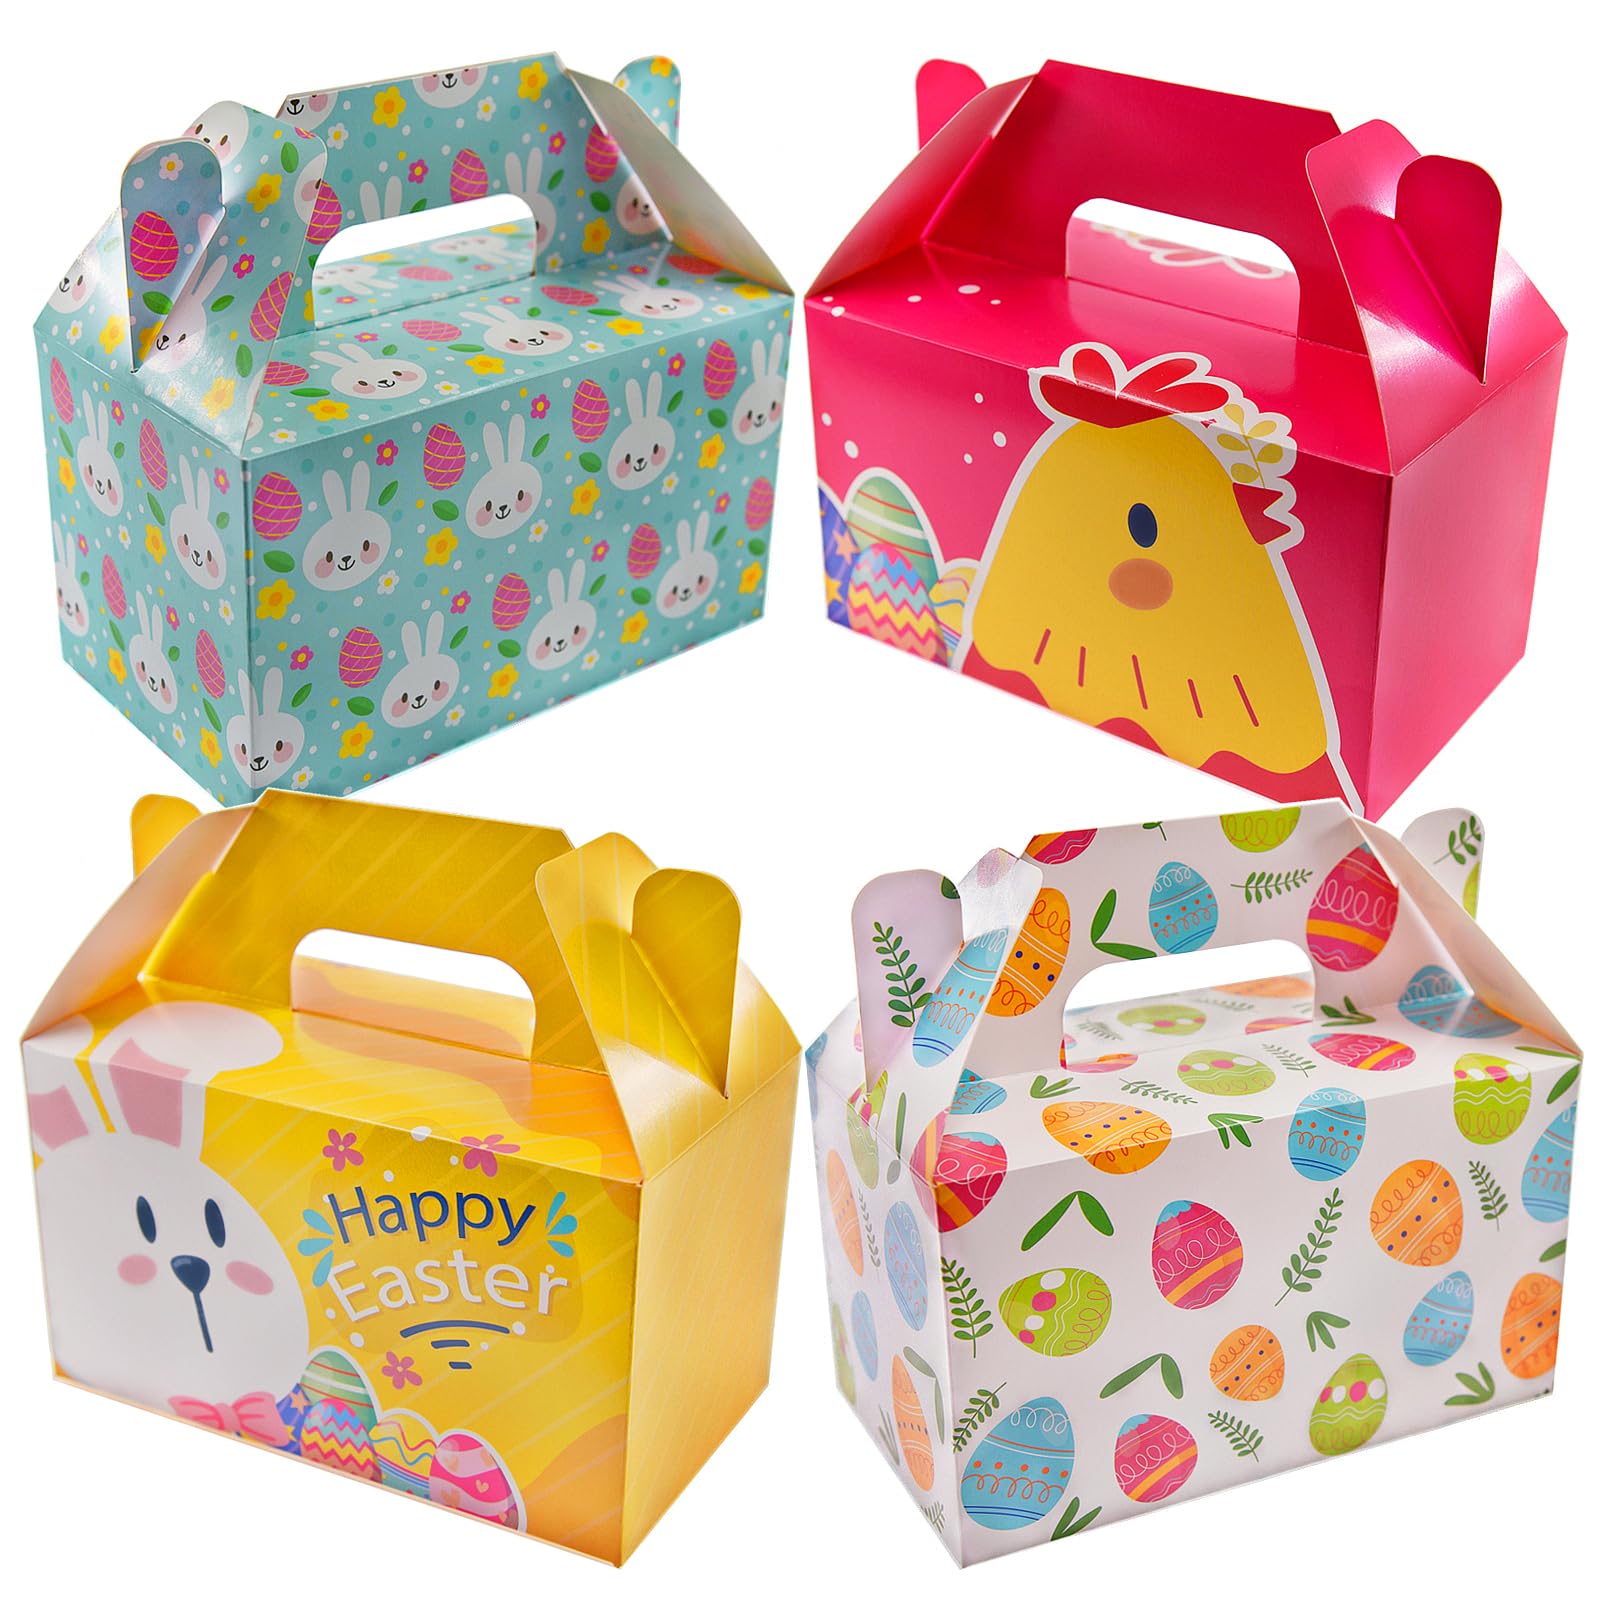 Easter Gift Box Ideas 5